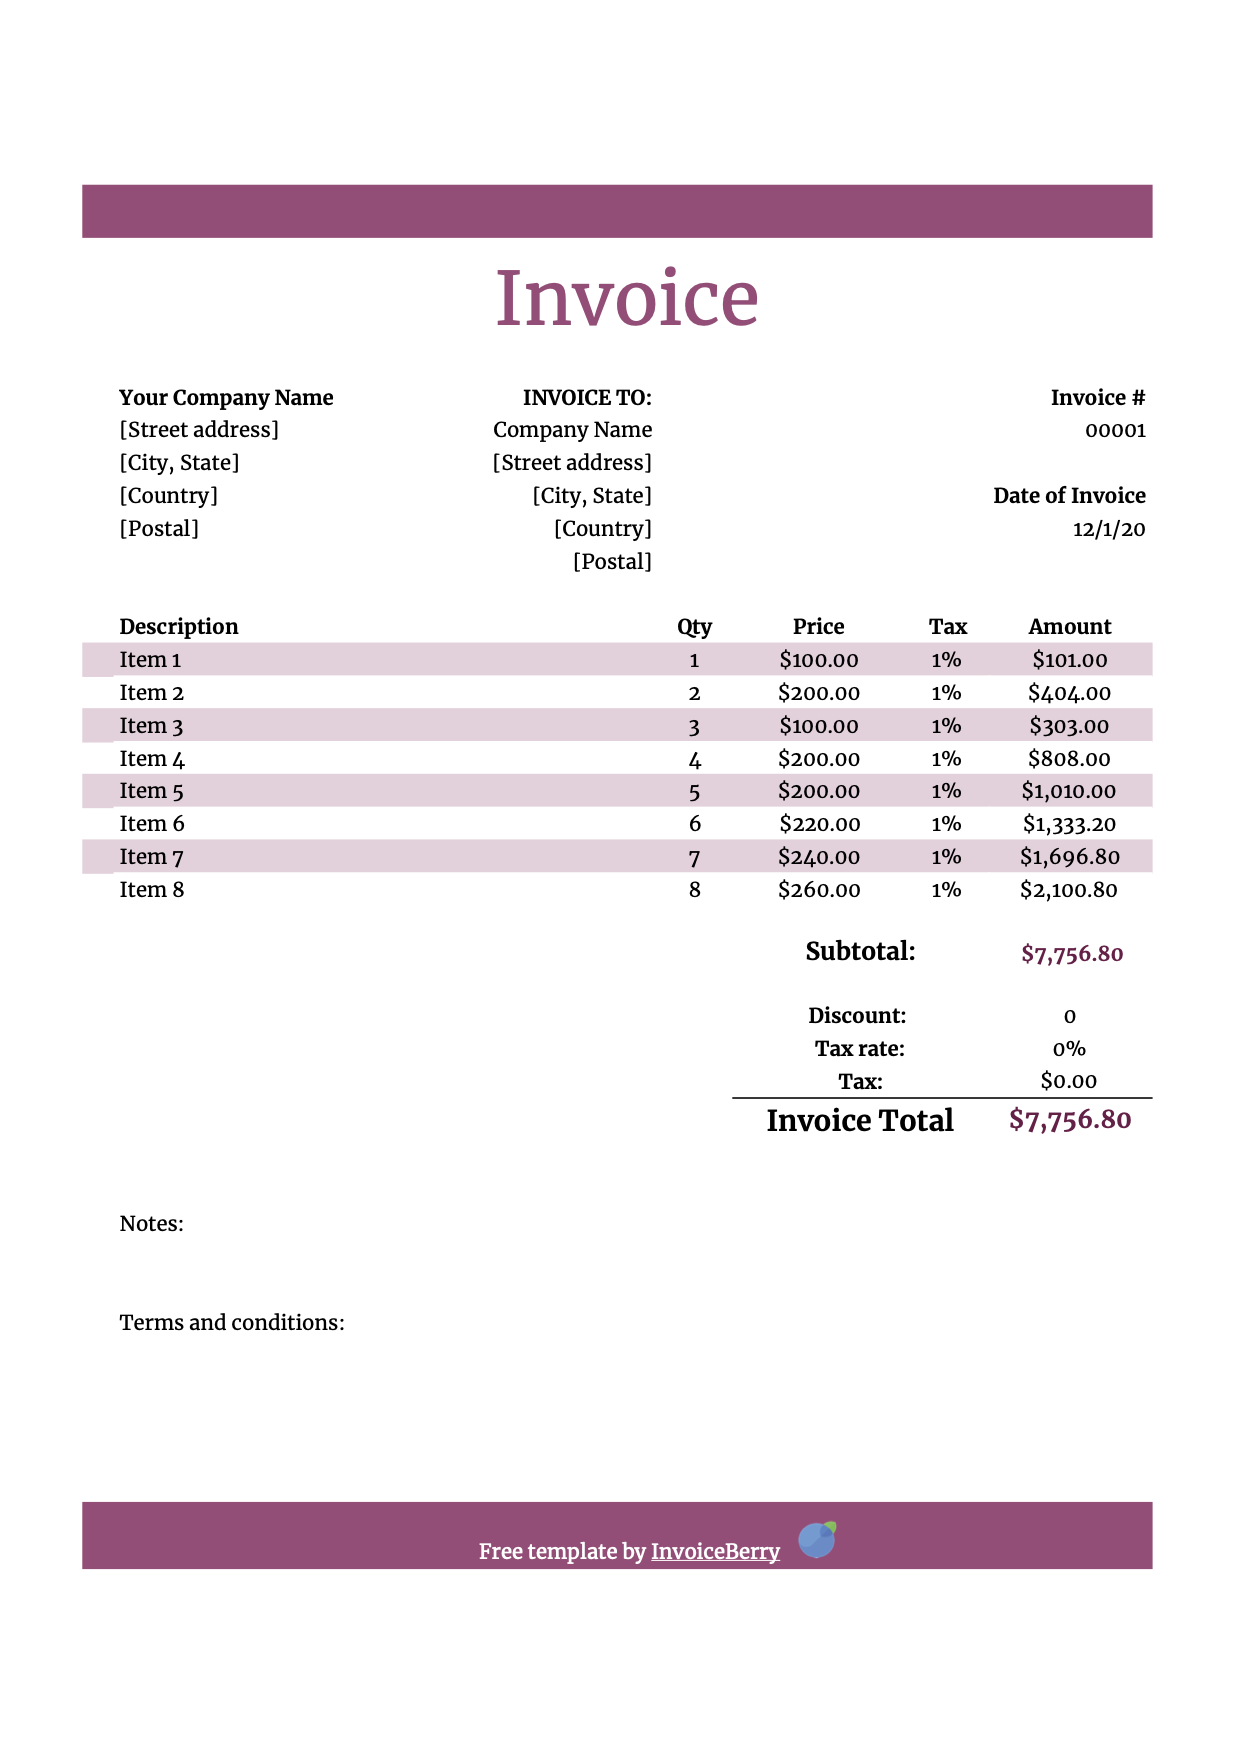 Free Numbers invoice templates - get invoice templates for Mac In Free Invoice Template Word Mac